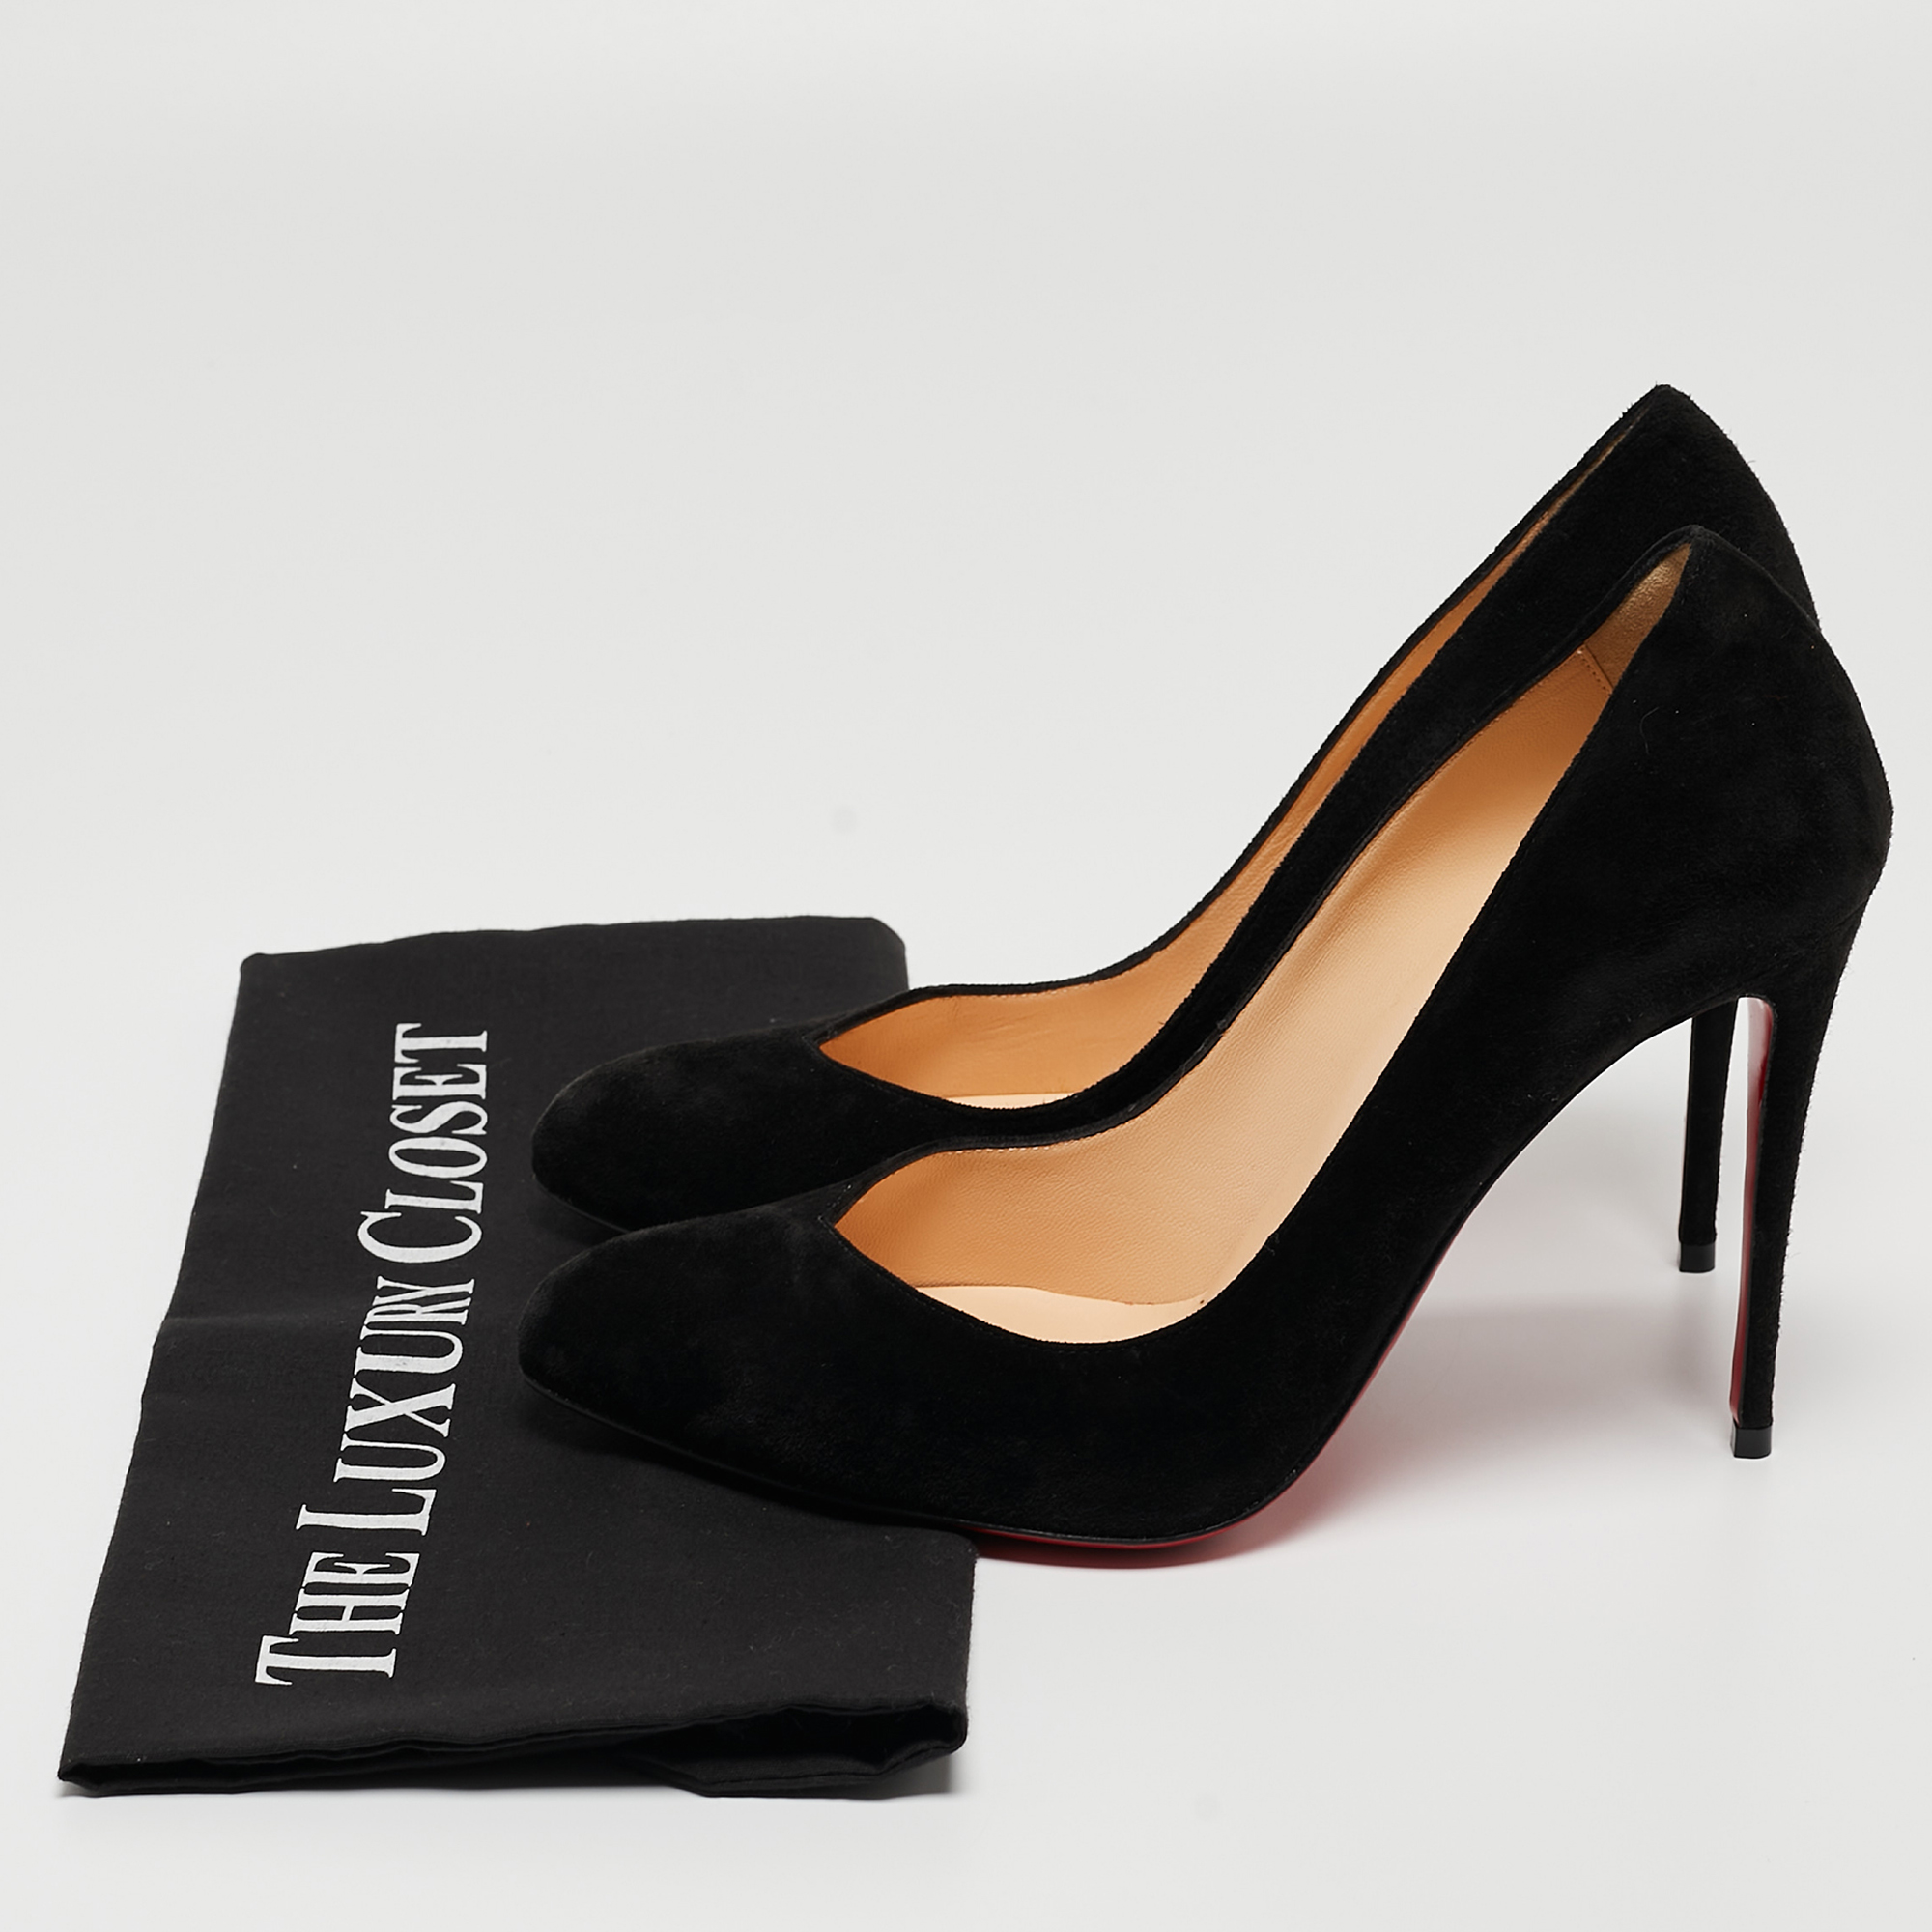 Christian Louboutin Black Suede Pointed Toe Pumps Size 38.5